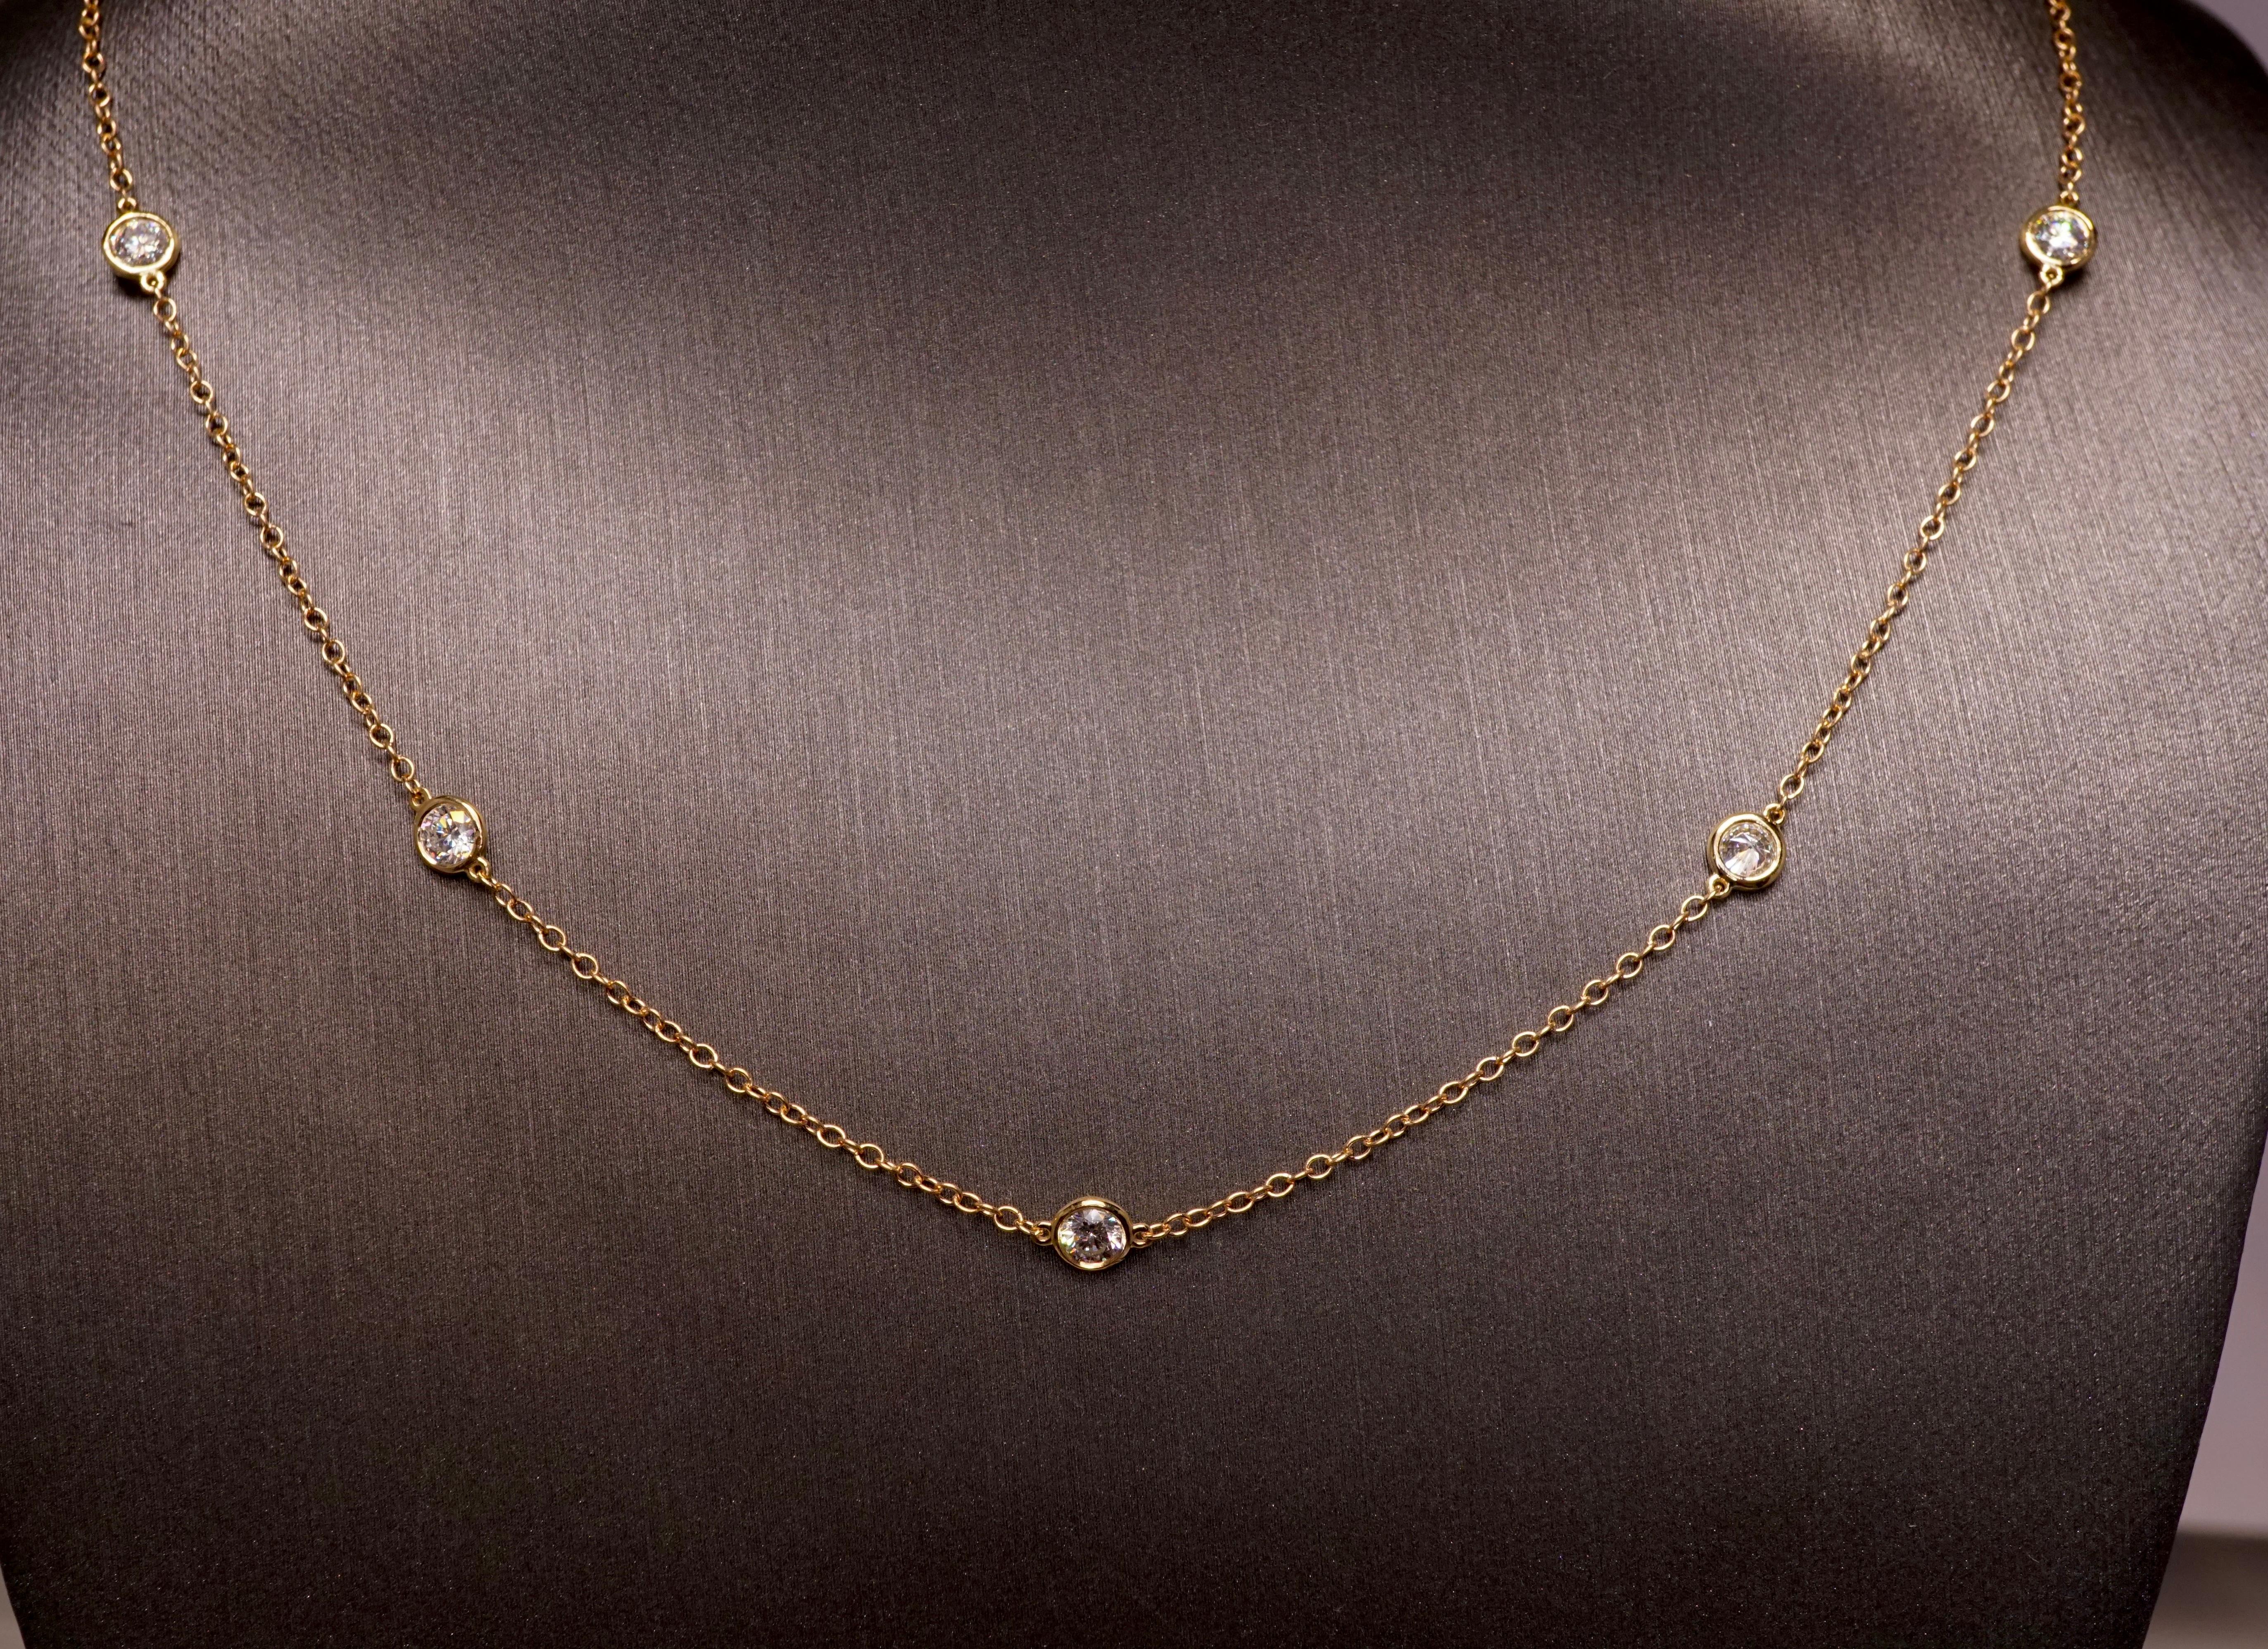 Round cut diamond necklace with 5 bezel set round diamonds set in 14K Yellow gold. Round Brilliant diamonds are F-G VS2-SI1 . Total Carat weight = .80ct. Total weight 1.8 grams. Length is 16